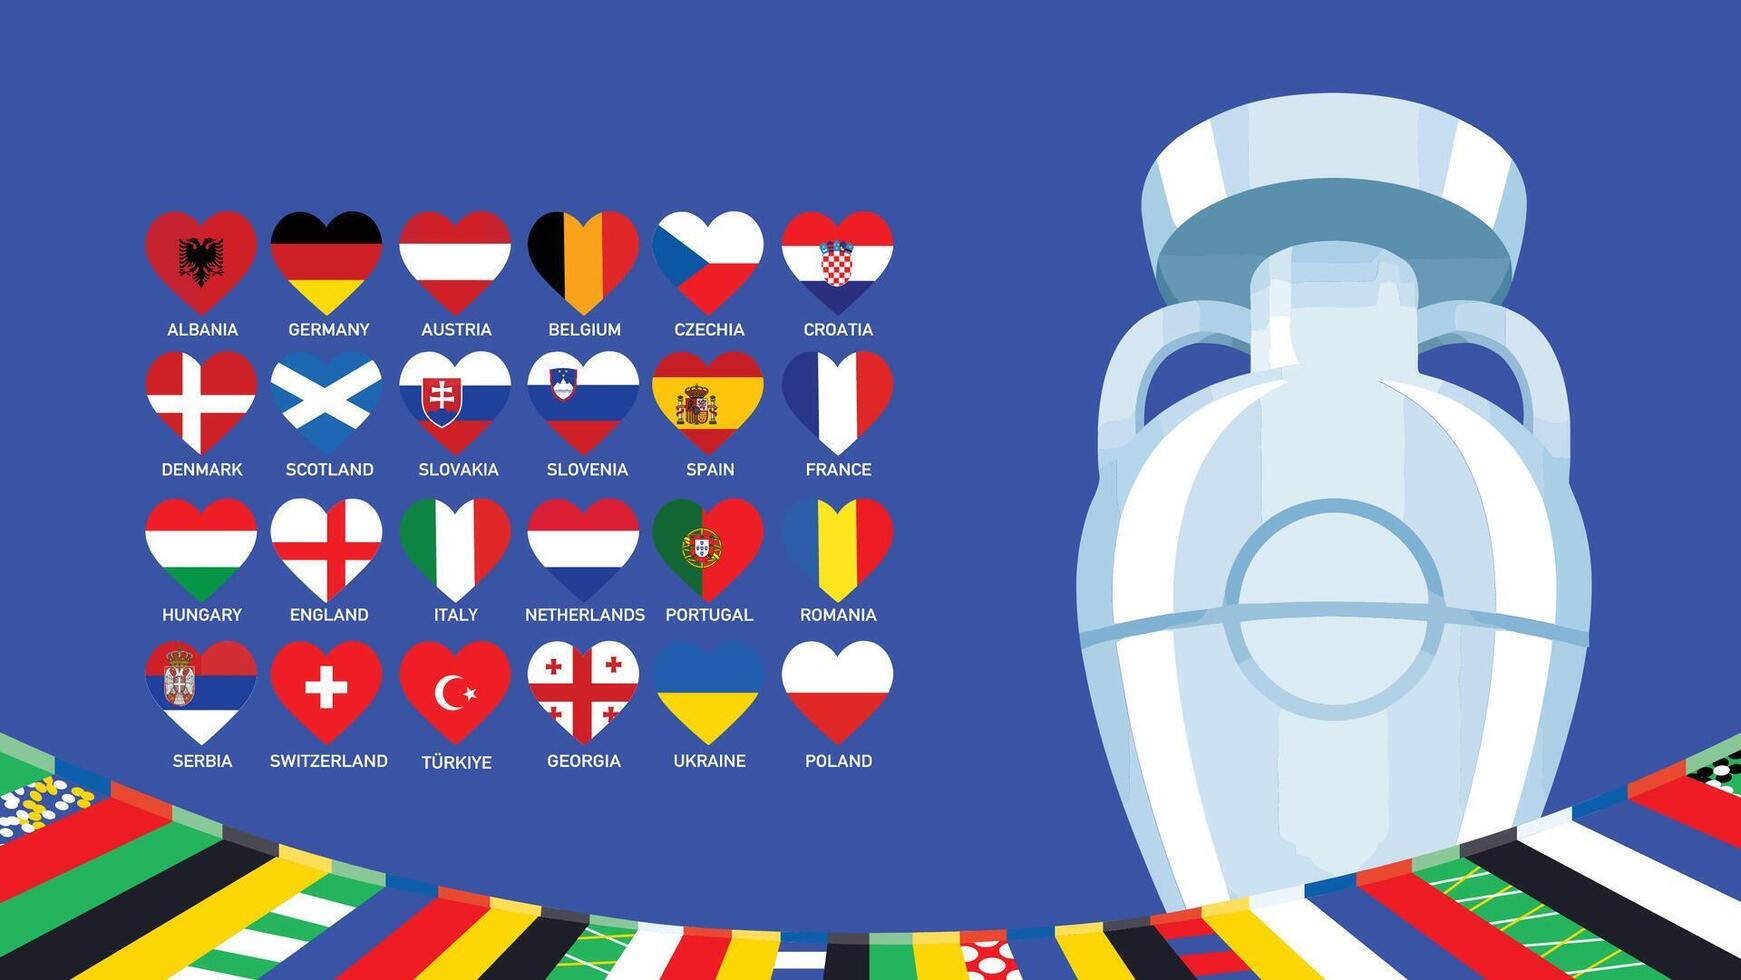 Euro 2024 Germany Flags Heart Design With Trophy Symbol Official logo European Football final illustration vector